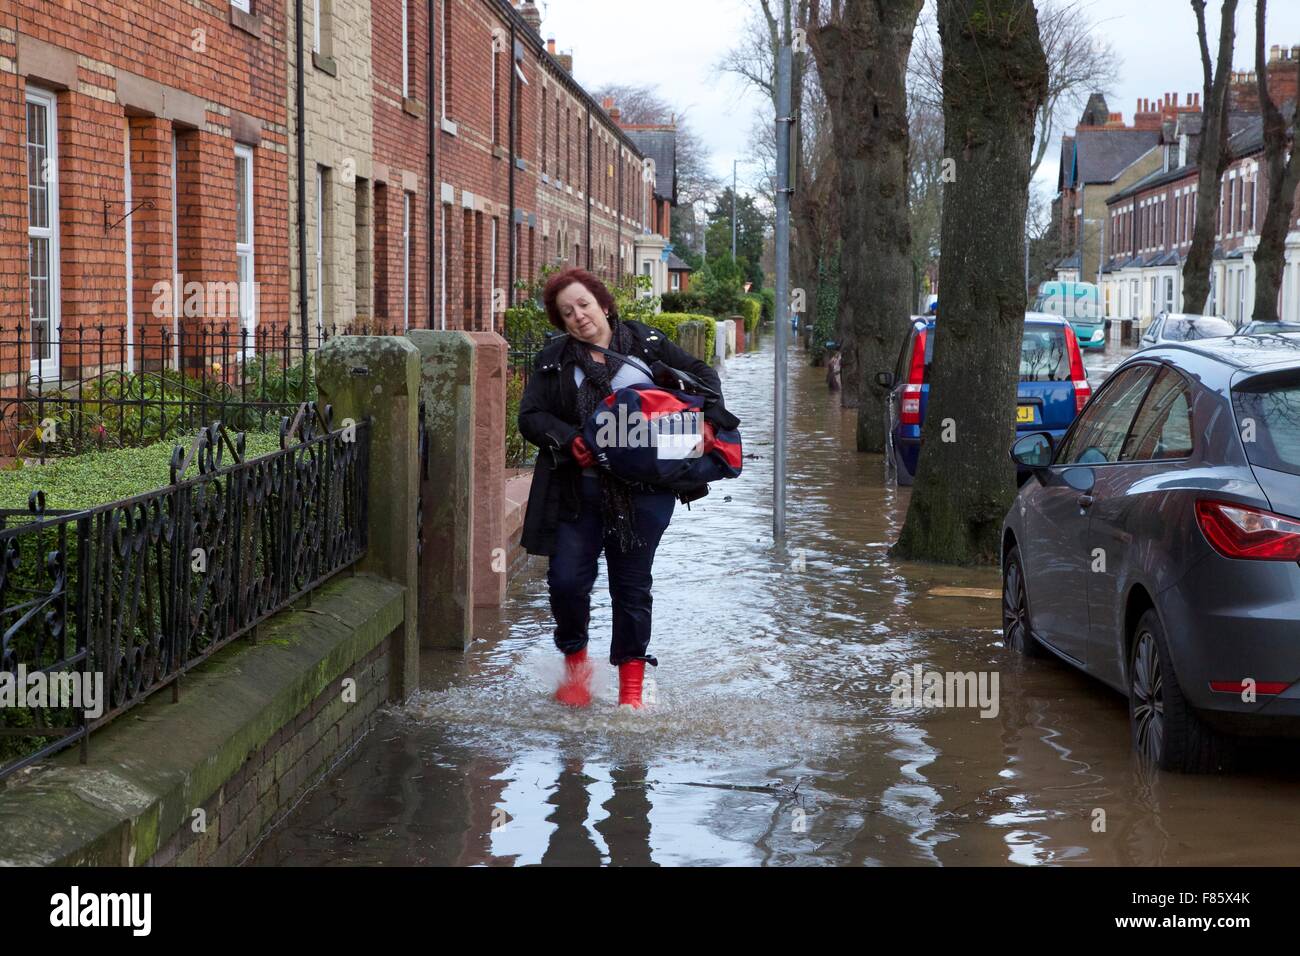 Cumbria Floods. 6th December 2015. Streets flooded. Woman wades out of flood waters with a few possessions. Flood waters catch residents unprepared  as their homes are inundated. Storm Desmond caused severe flooding in Carlisle and across Cumbria. Carlisle, Cumbria, England, UK. Credit:  Andrew Findlay/Alamy Live News Stock Photo